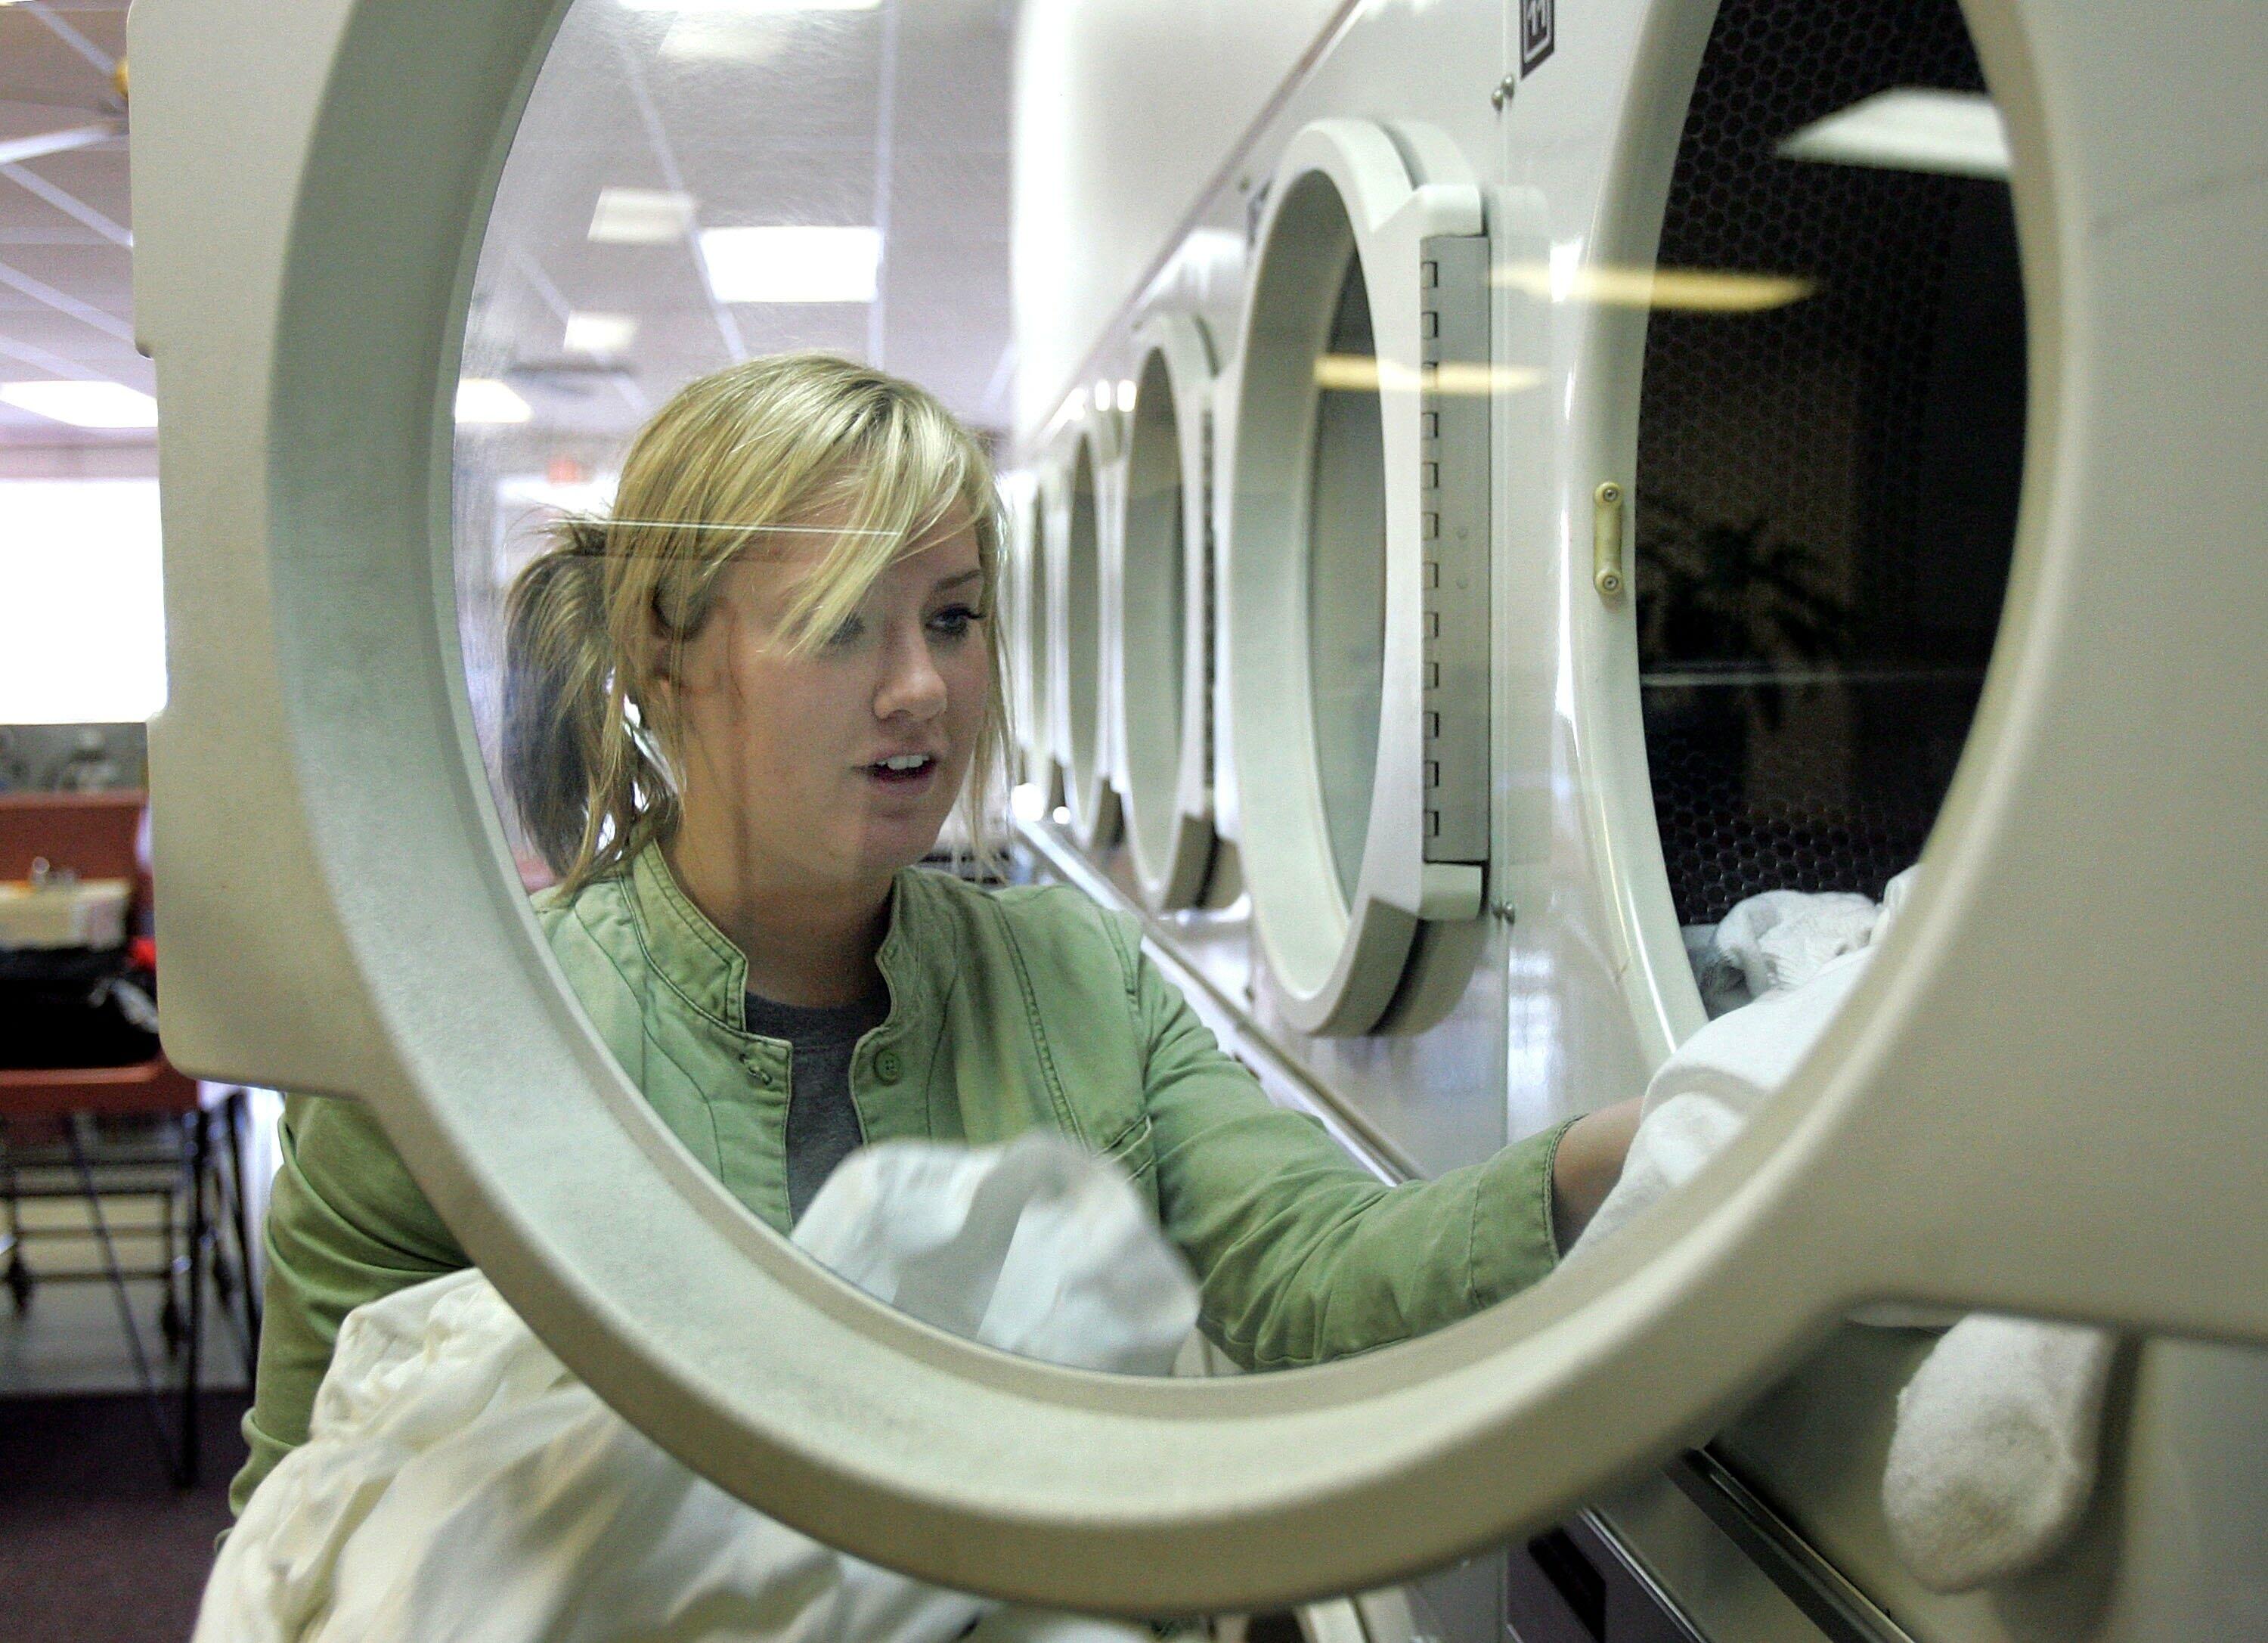 MOUNT PROSPECT, IL - MAY 11:  Katie Reynolds pulls out clothing from a Maytag commercial dryer at a Maytag laundromat May 11, 2006 in Mount Prospect, Illinois. Whirlpool reportedly may be closing three Maytag manufacturing plants and offices as well as el